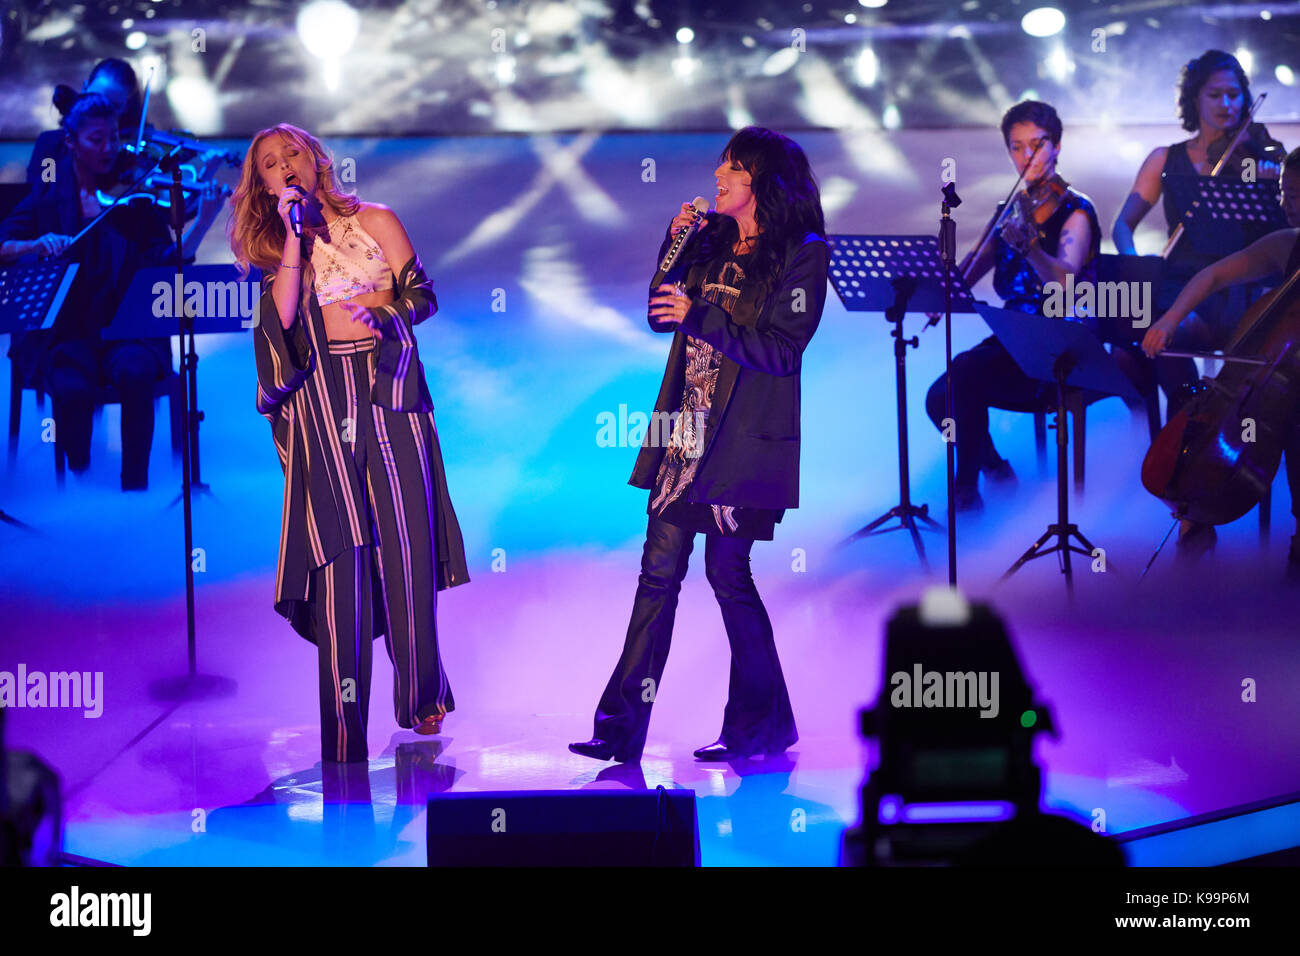 Zara Larsson and Nena perform during the shooting of the TV show 'Nena -  Nichts versaeumt' (lit. 'Nothing missed') in Hamburg, Germany, 21 September  2017. The show will run on the occasion